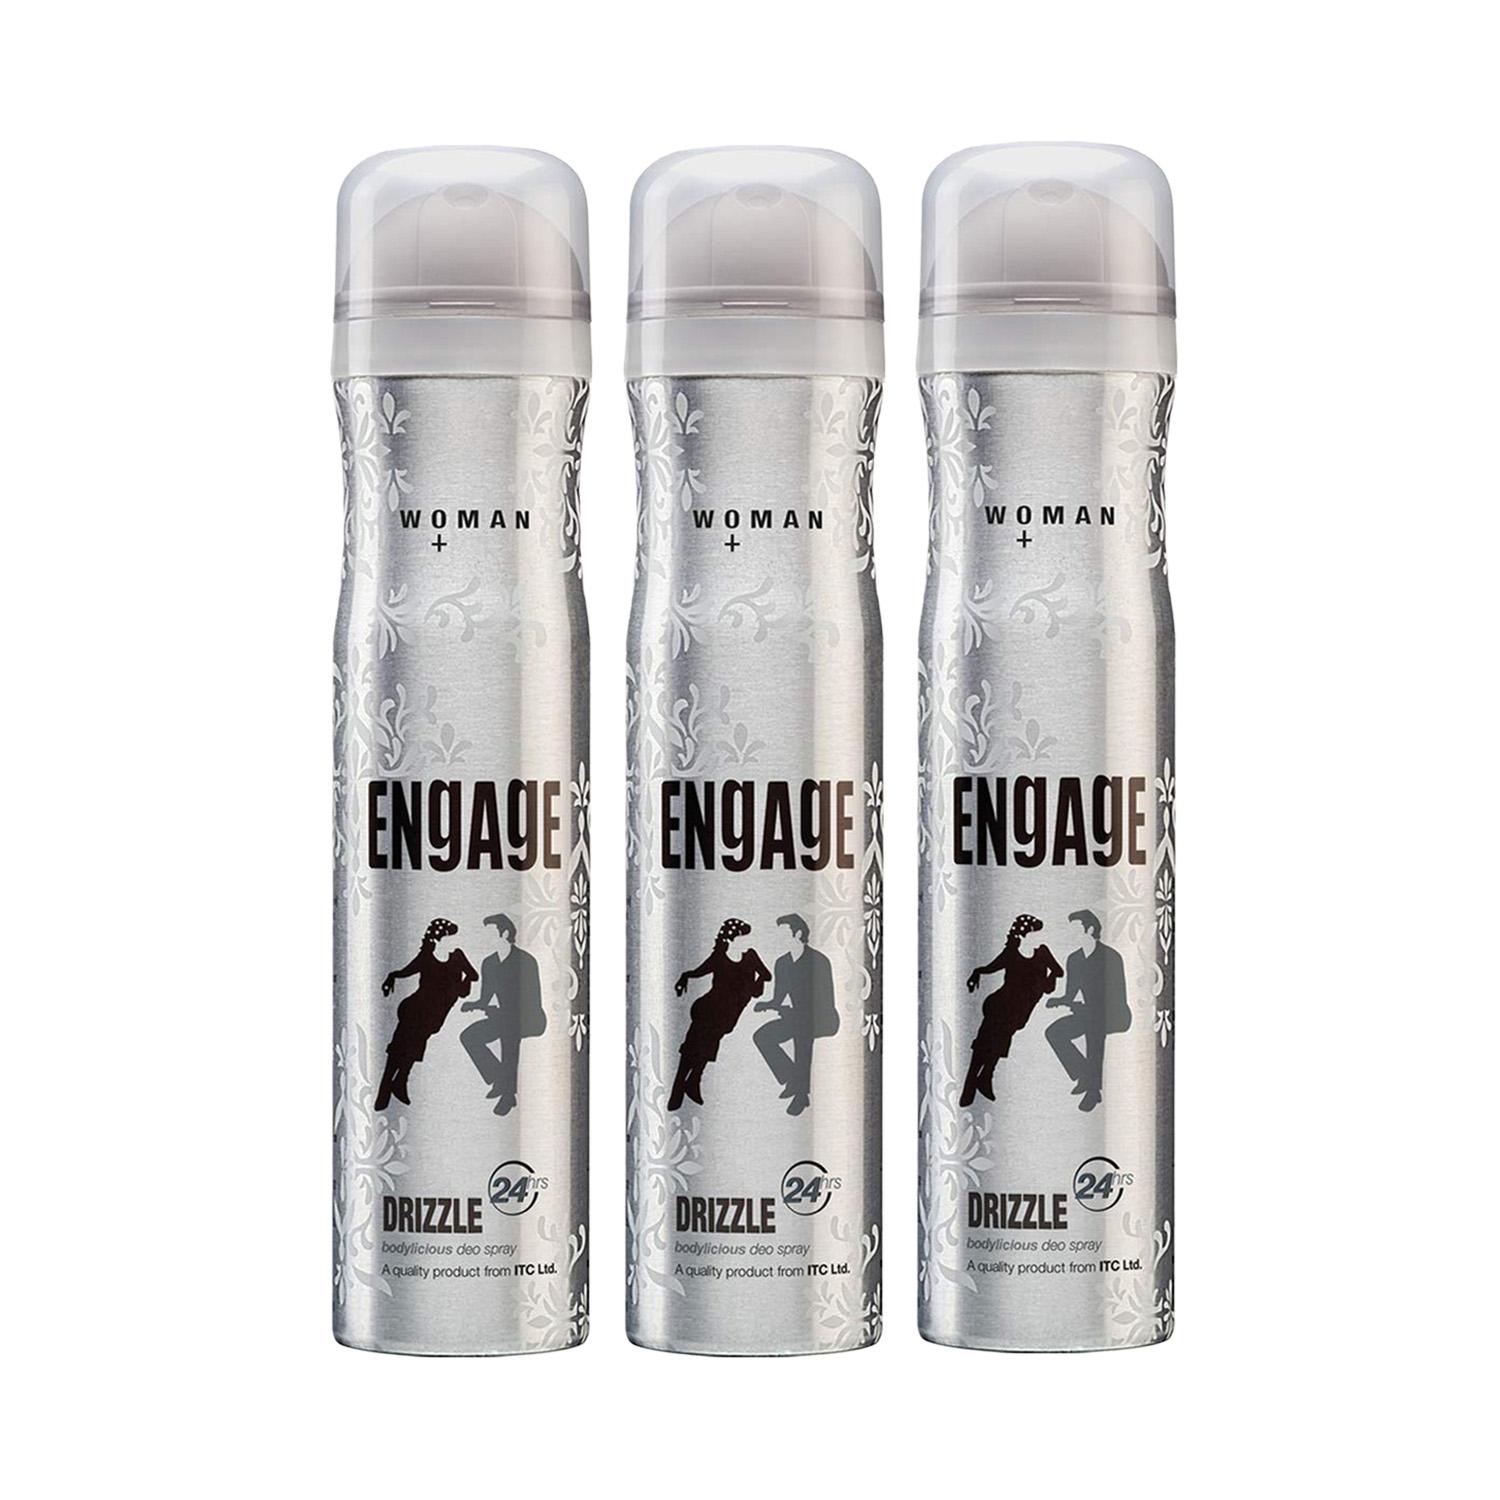 Engage Drizzle Deodorant Spray For Women (Pack of 3) Combo